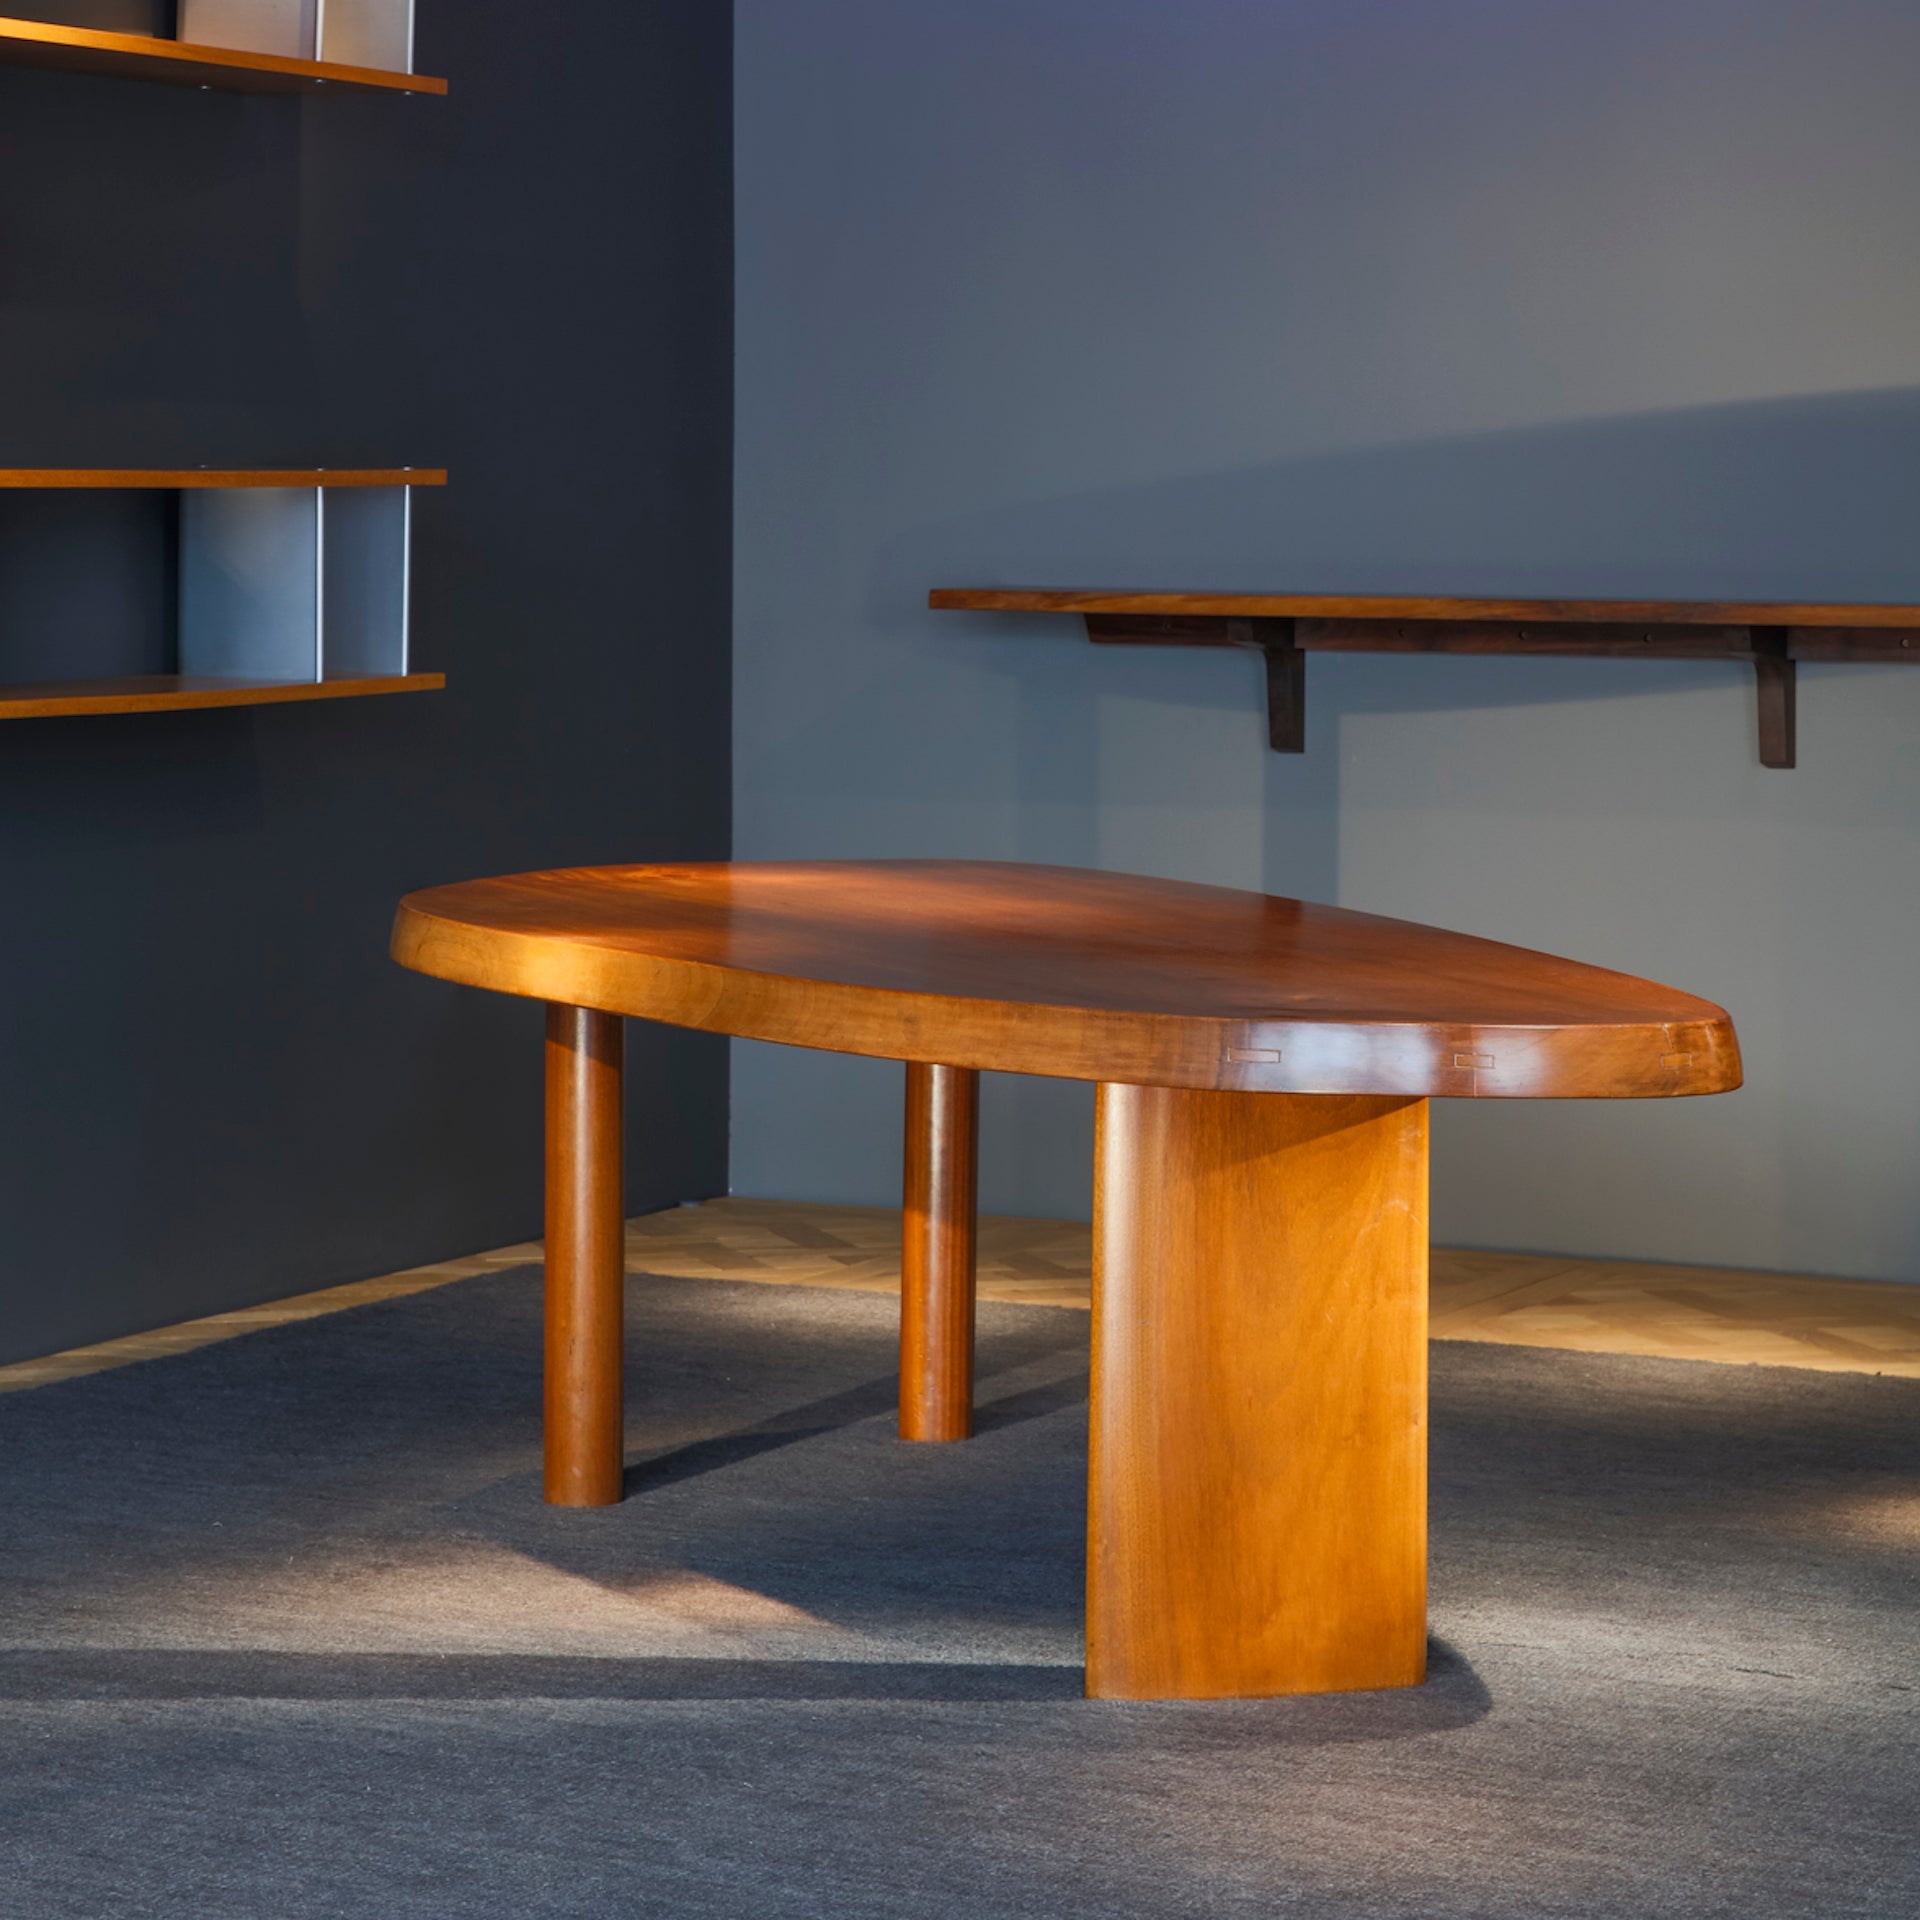 9: CHARLOTTE PERRIAND, Free-form dining table < Design Masterworks